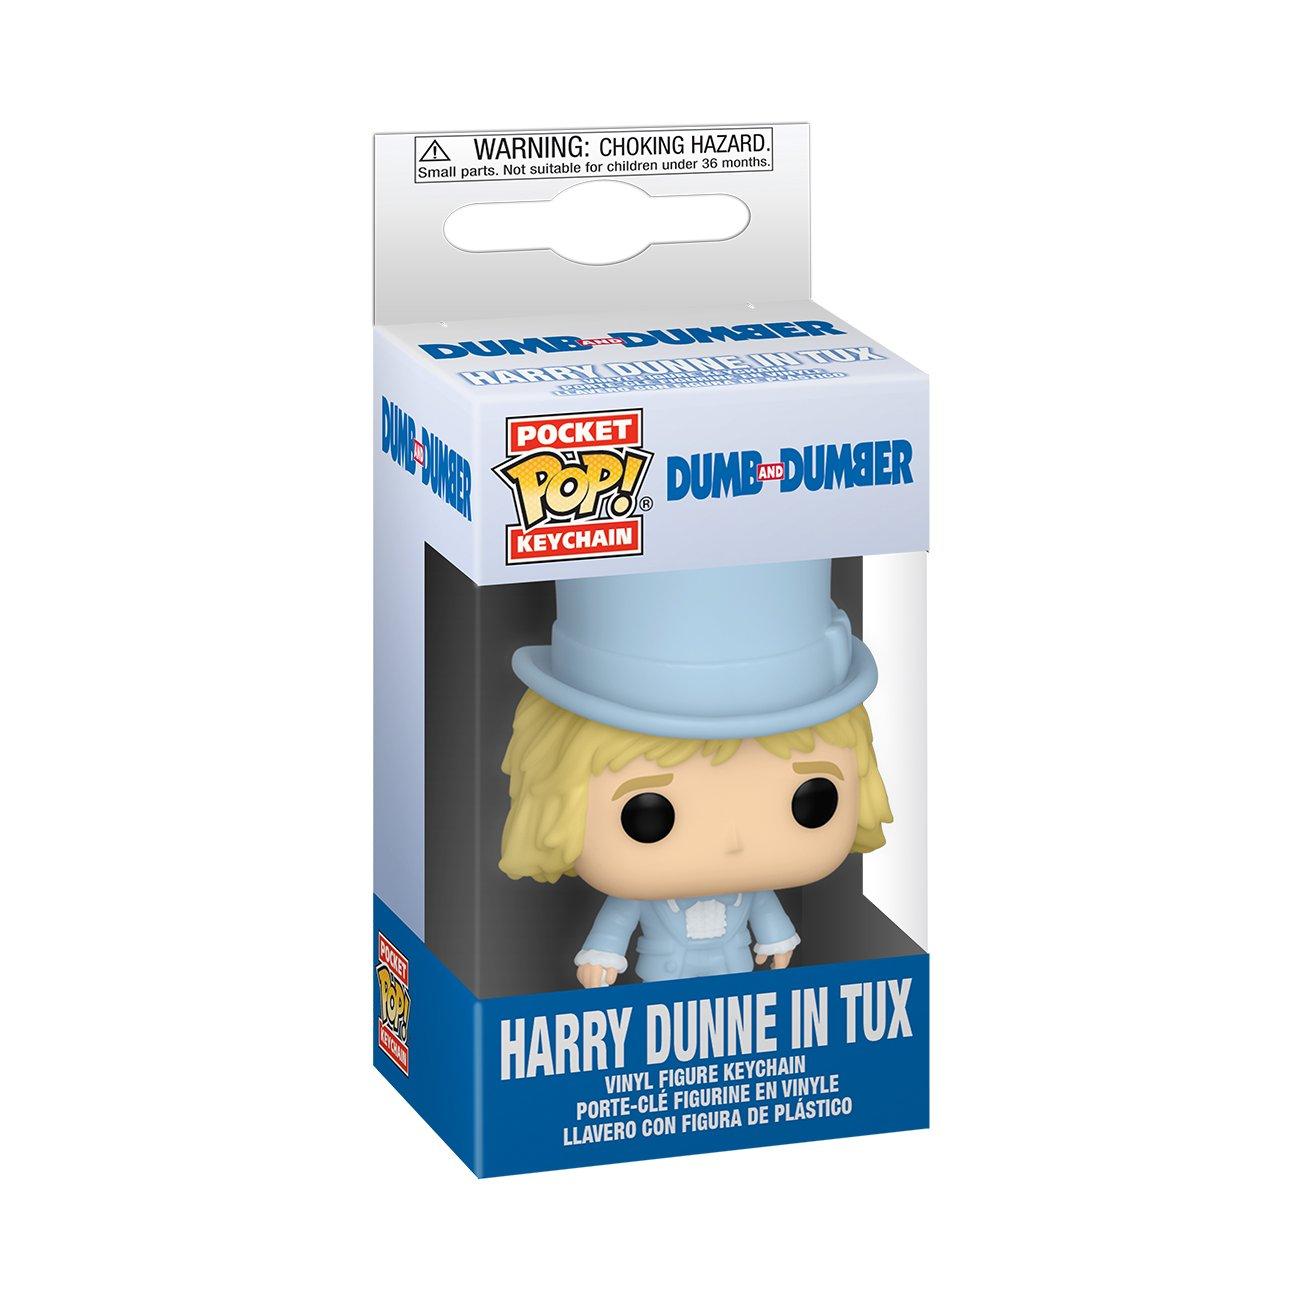 list item 2 of 2 Pocket POP! Keychain: Dumb and Dumber Harry Dunne in Tux